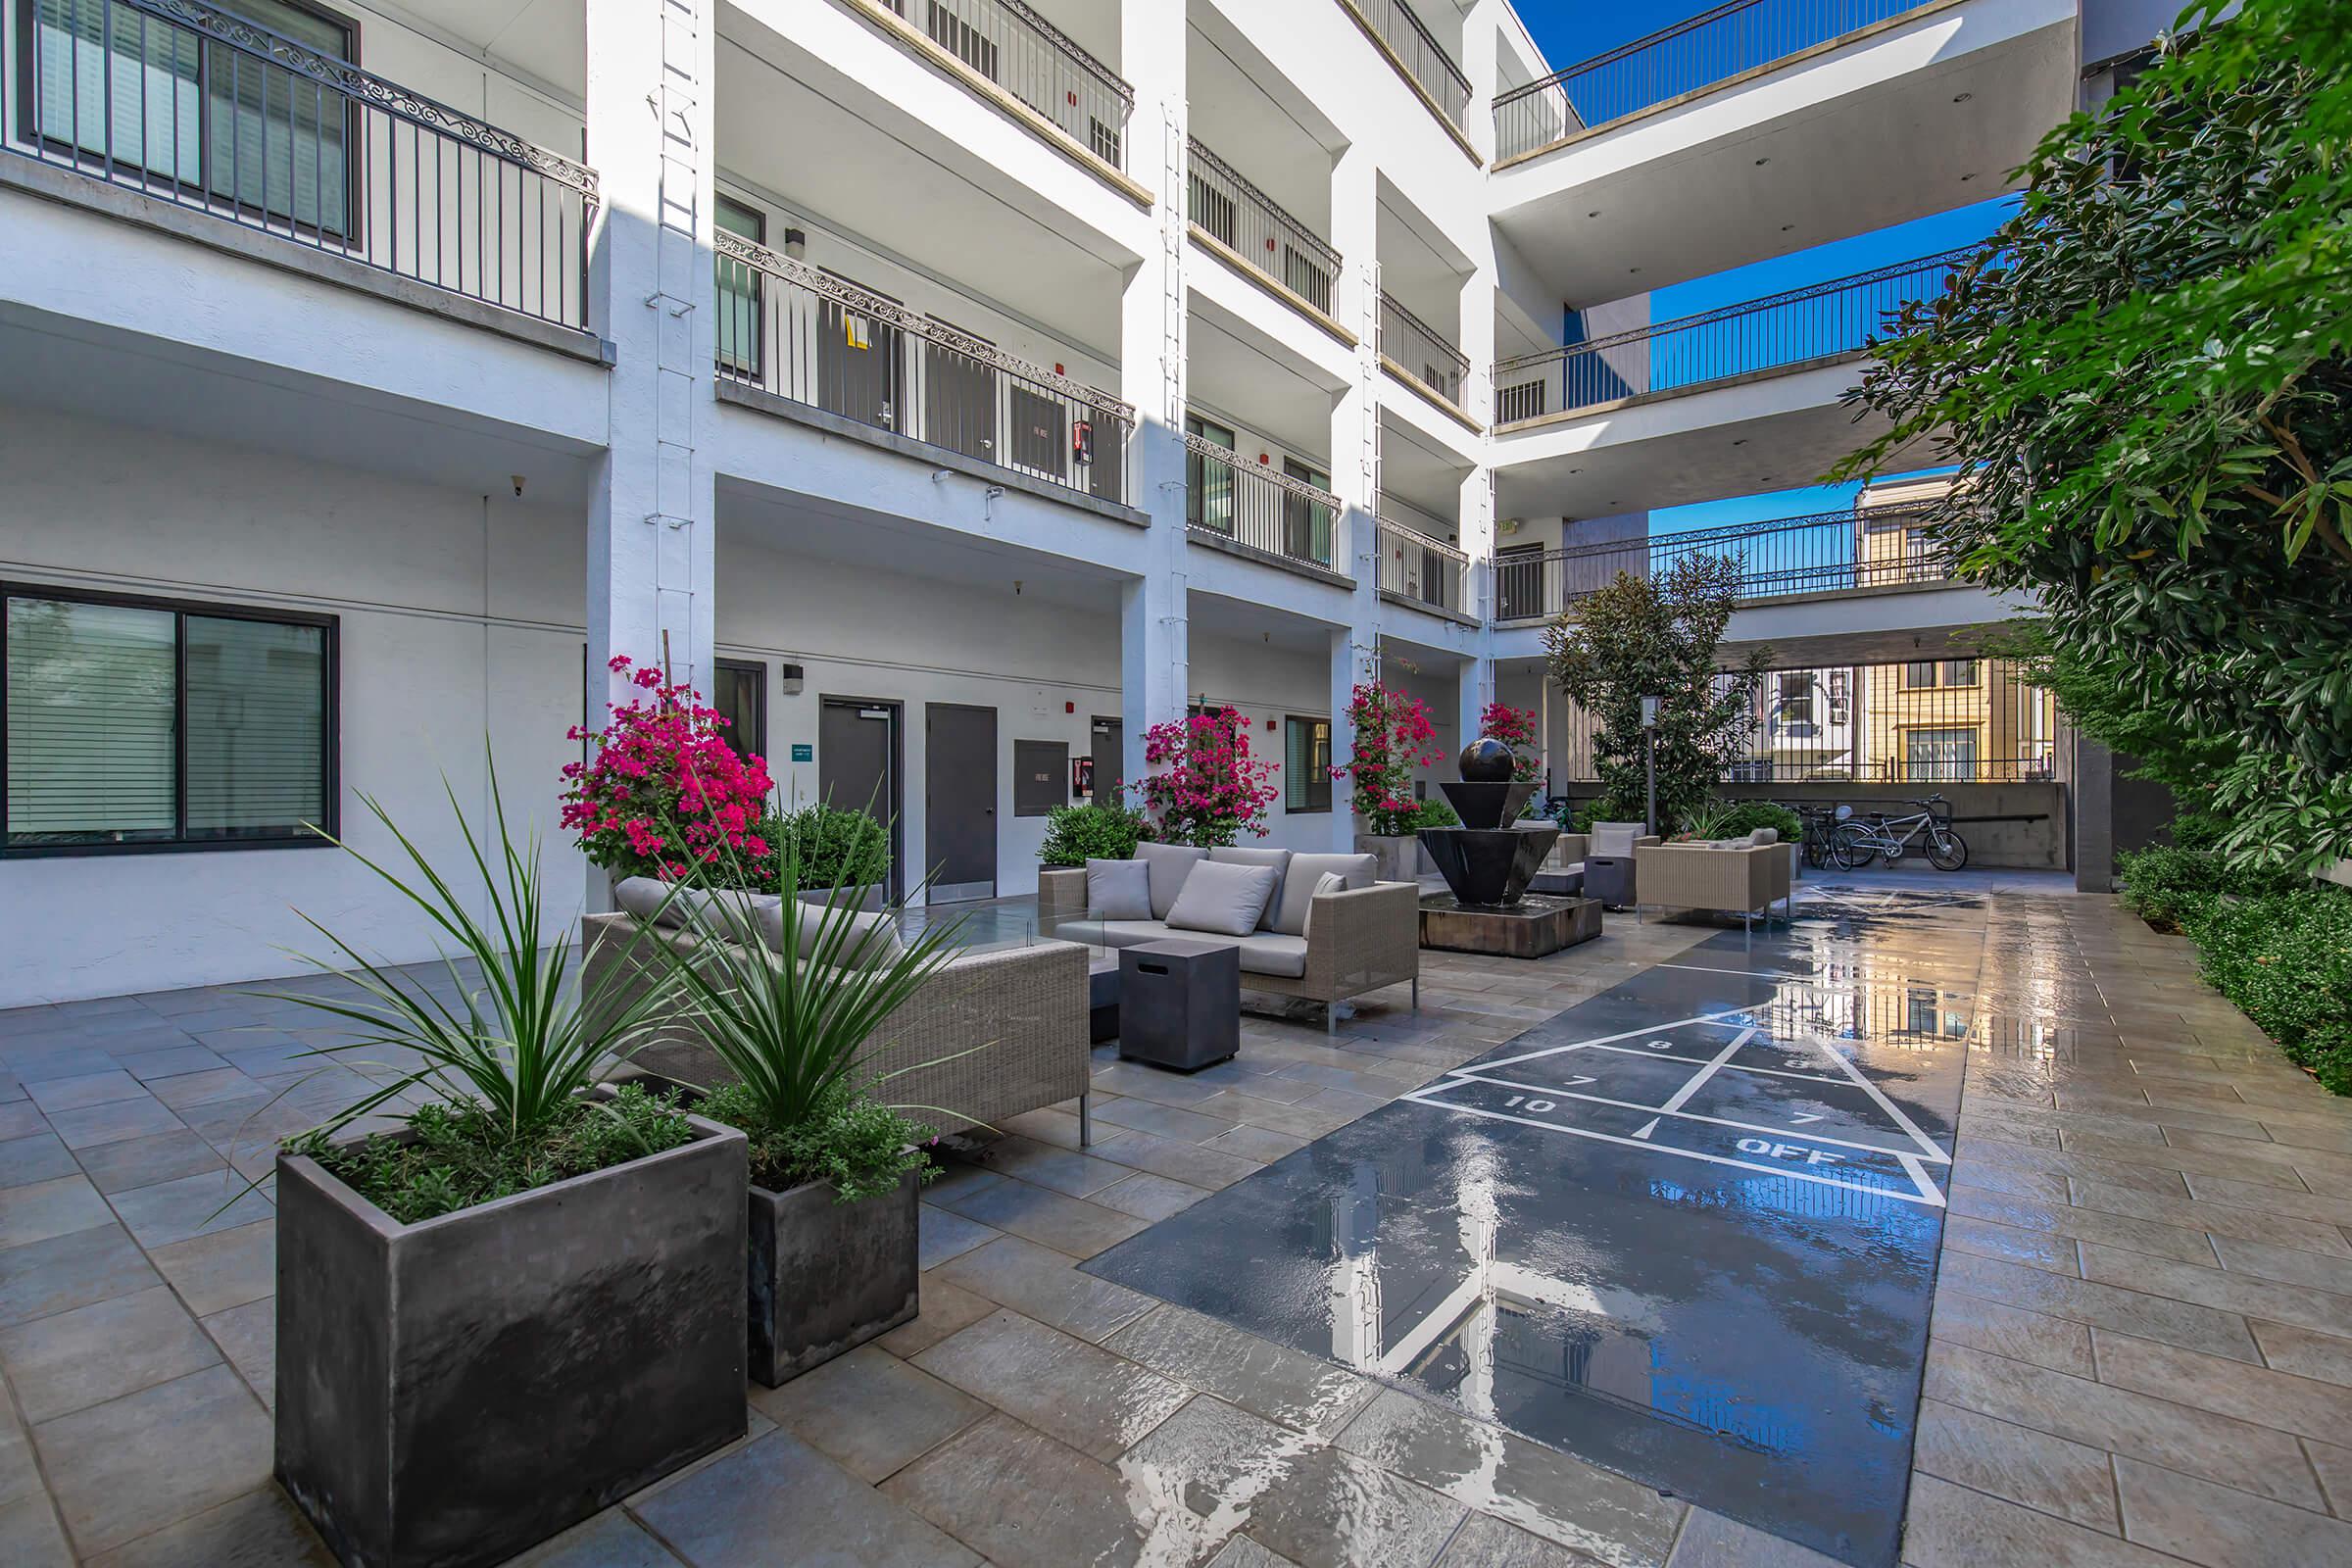 1825 Mission courtyard with shuffleboard